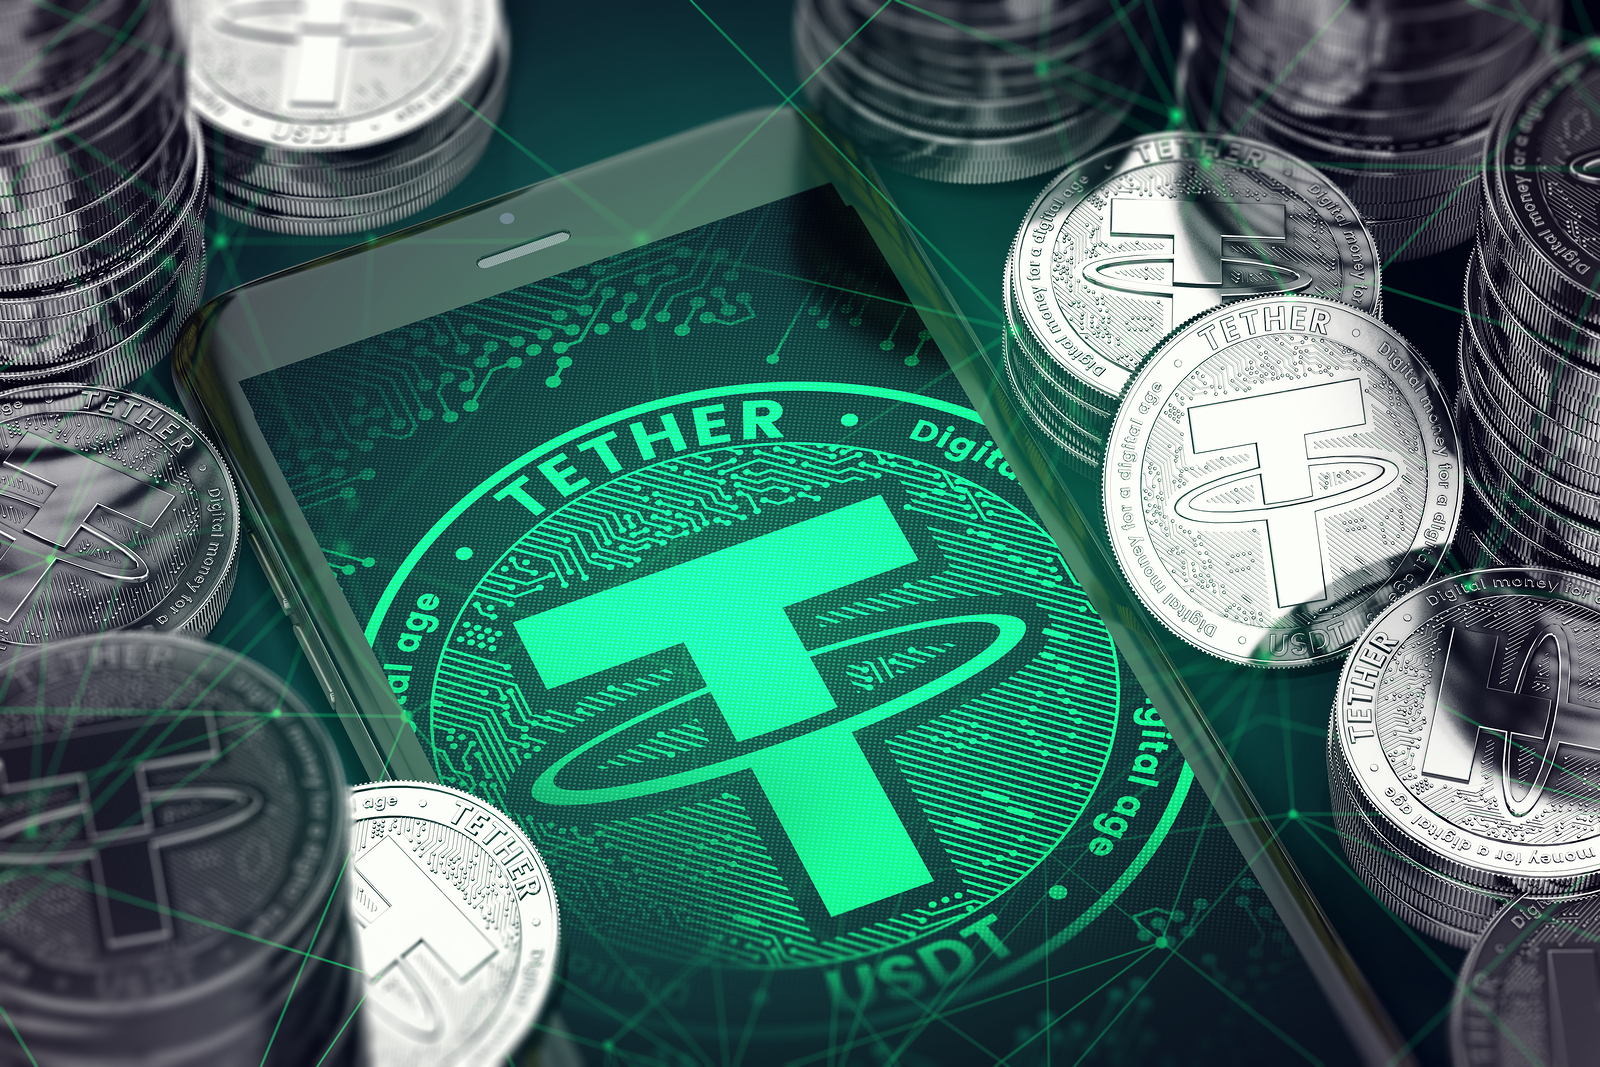  tether group xrex     